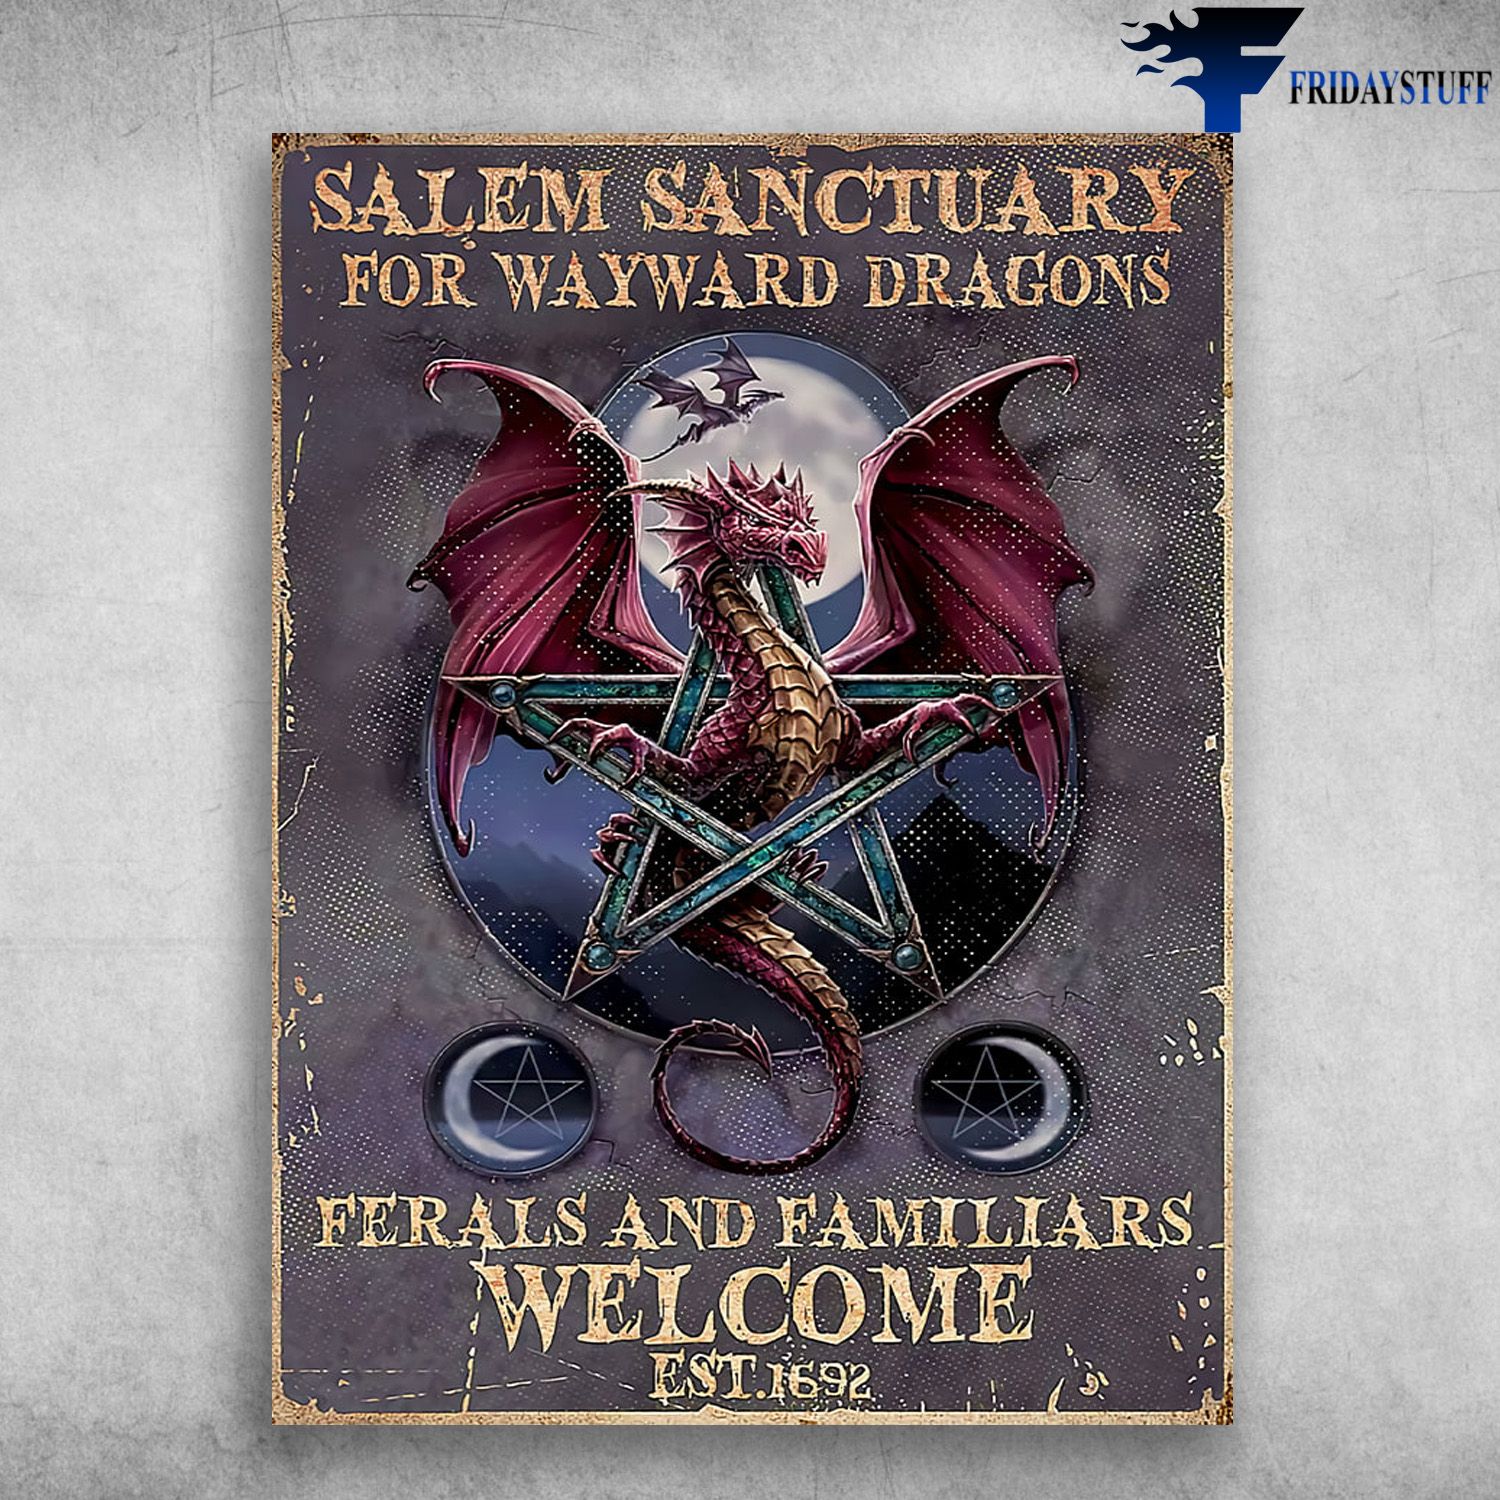 Dragon Poster, Halloween Day - Salem Sanctuary, For Wayward Dragons, Ferals And Familiars, Welcome